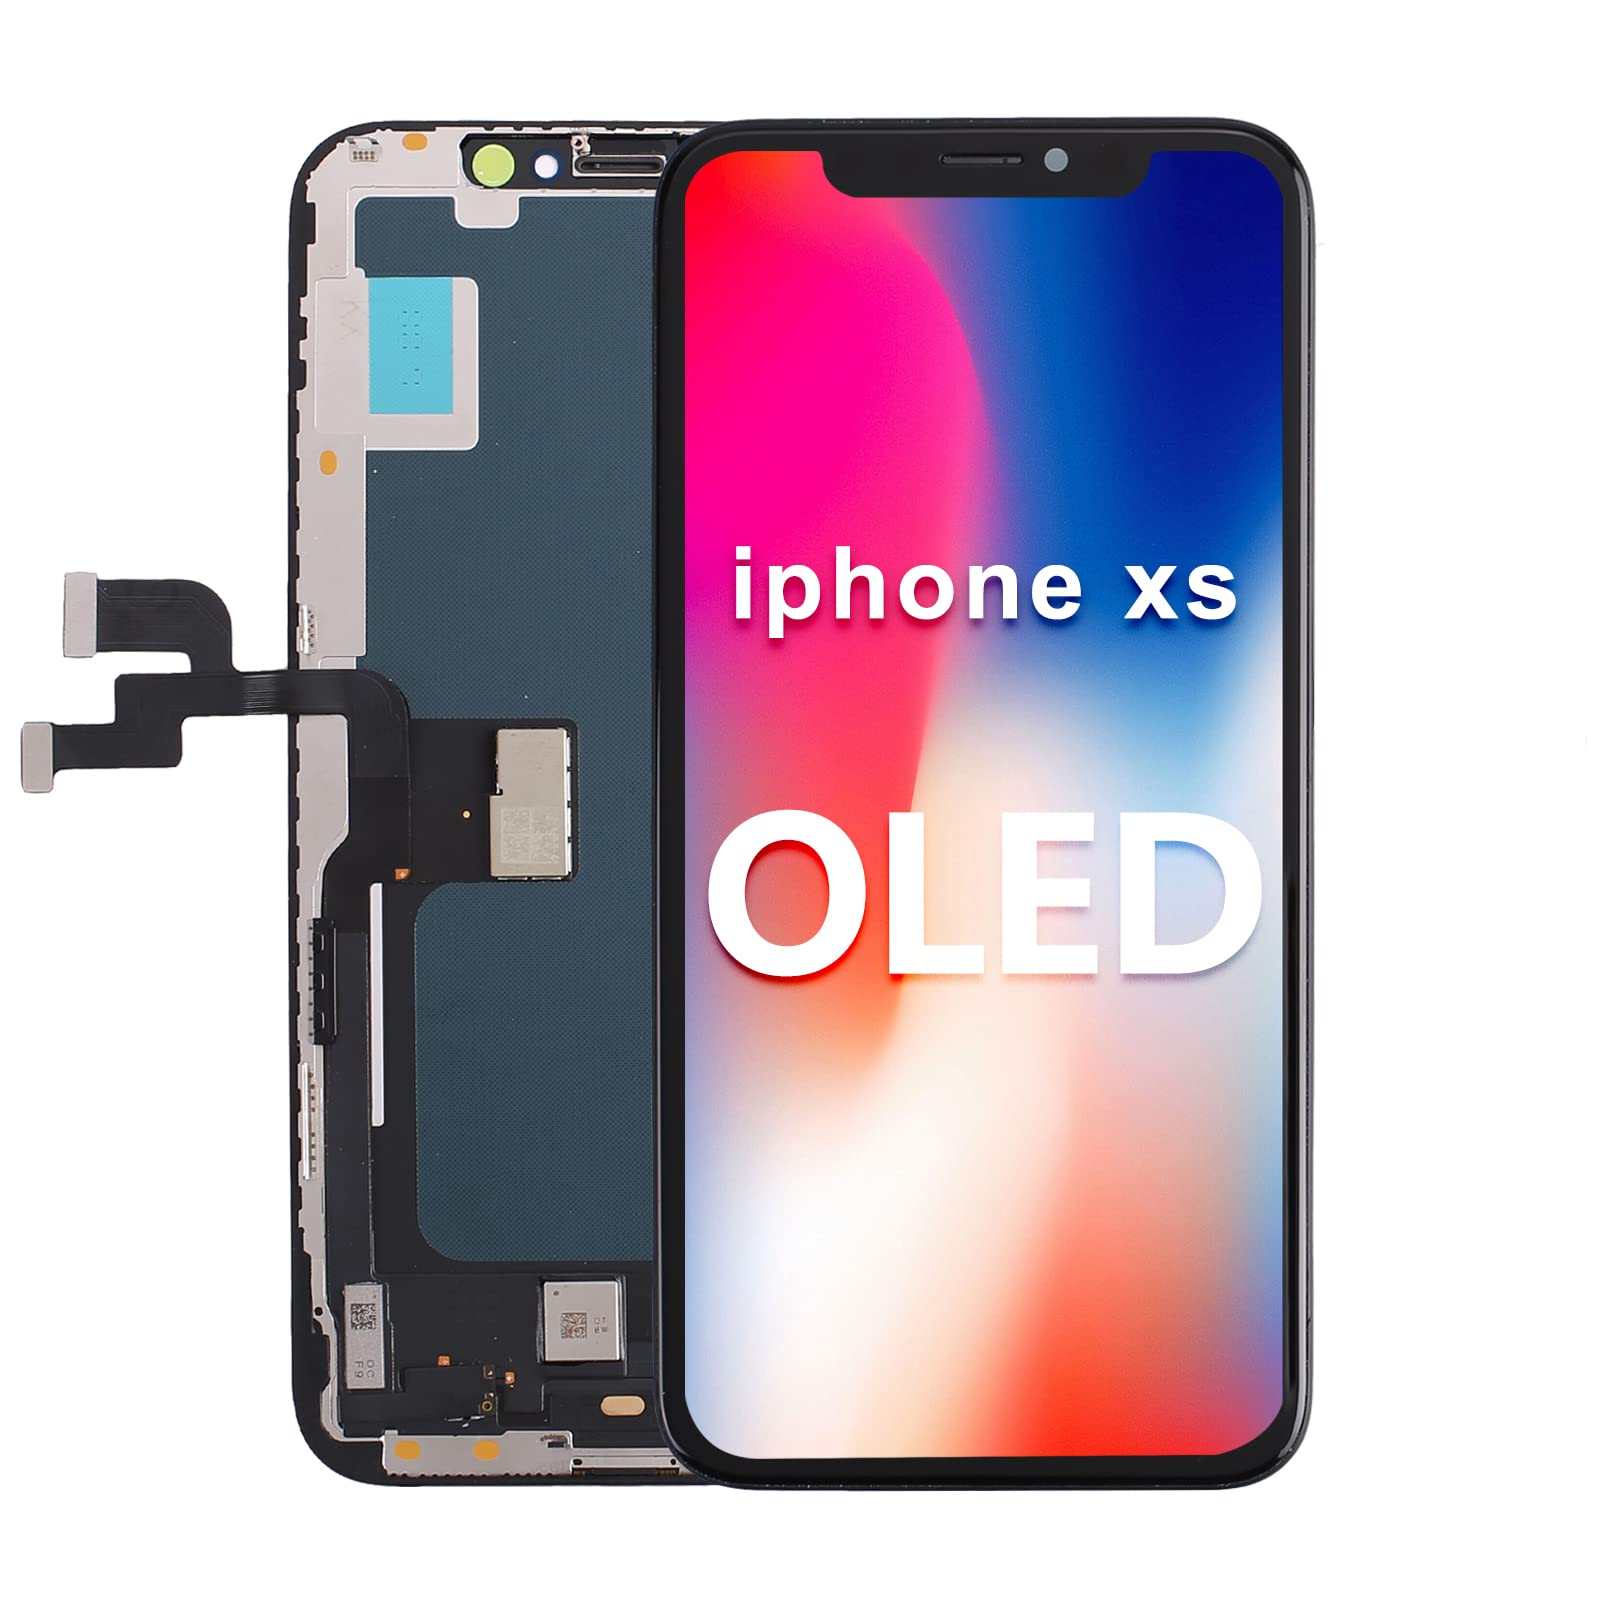 CCXSY OLED Display Screen Replacement for iPhone Xs, 3D Touch 5.8 Inch Screen Digitizer Full Assembly for Model A1920/A2097/A2098/A2099/A2100